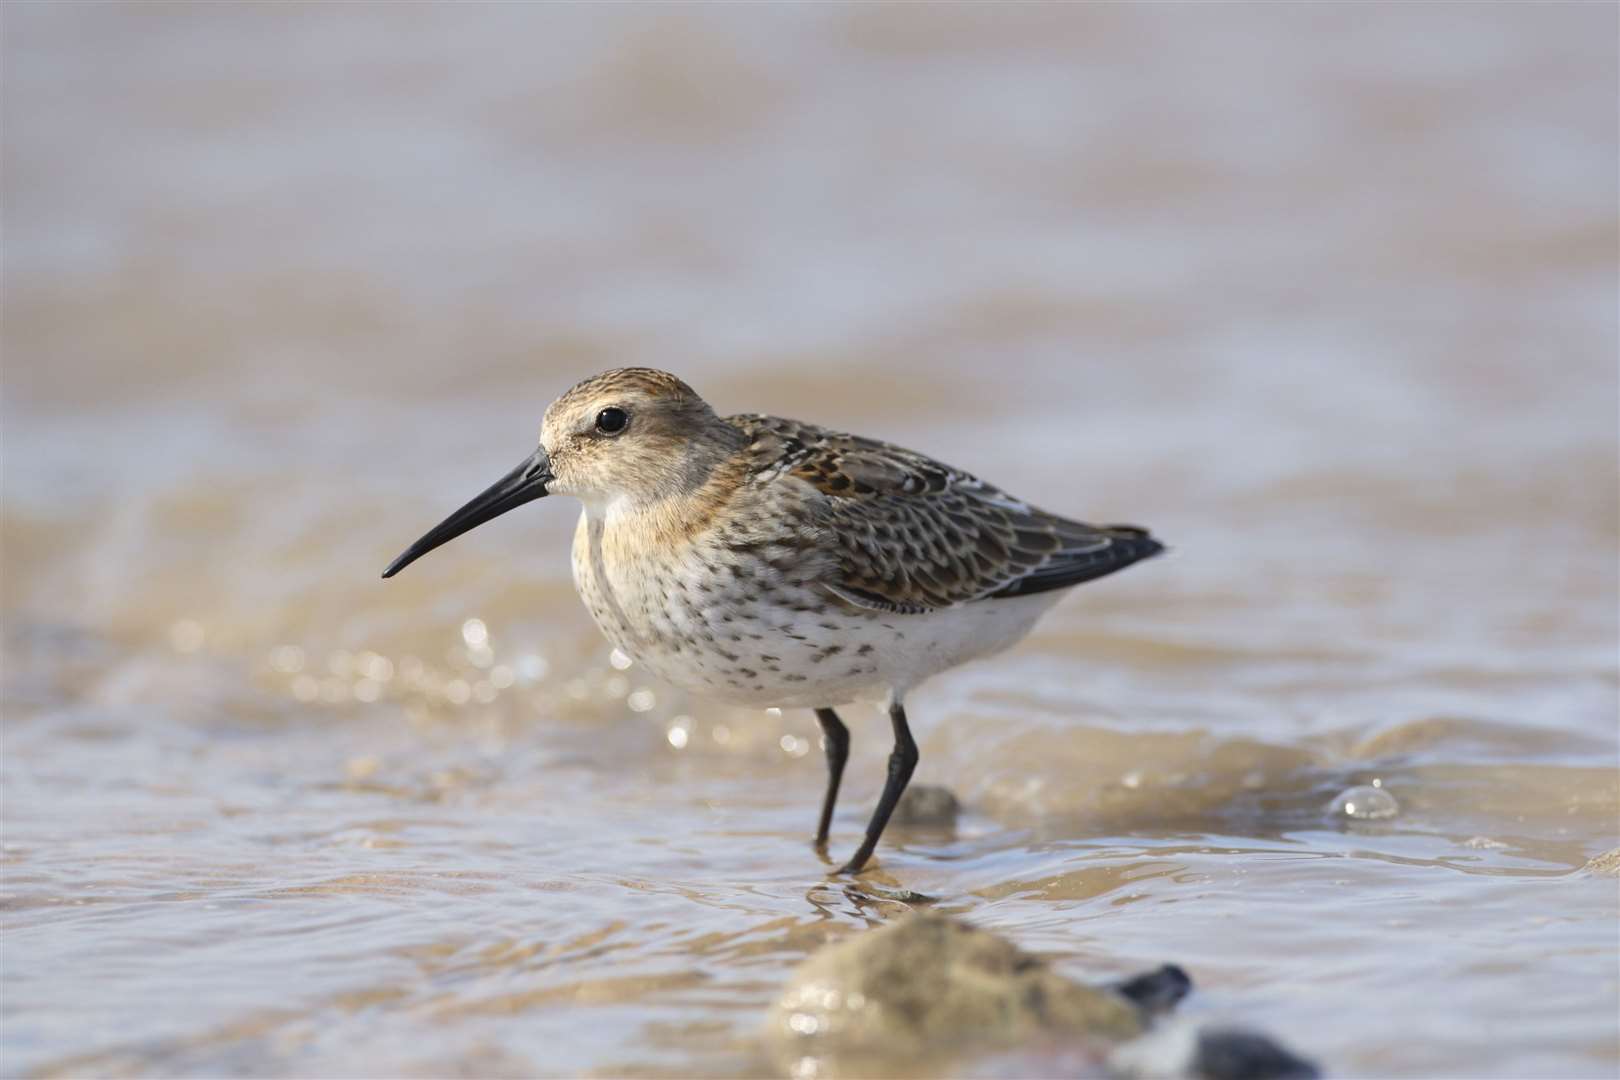 Wading birds like this Dunlin will benefit